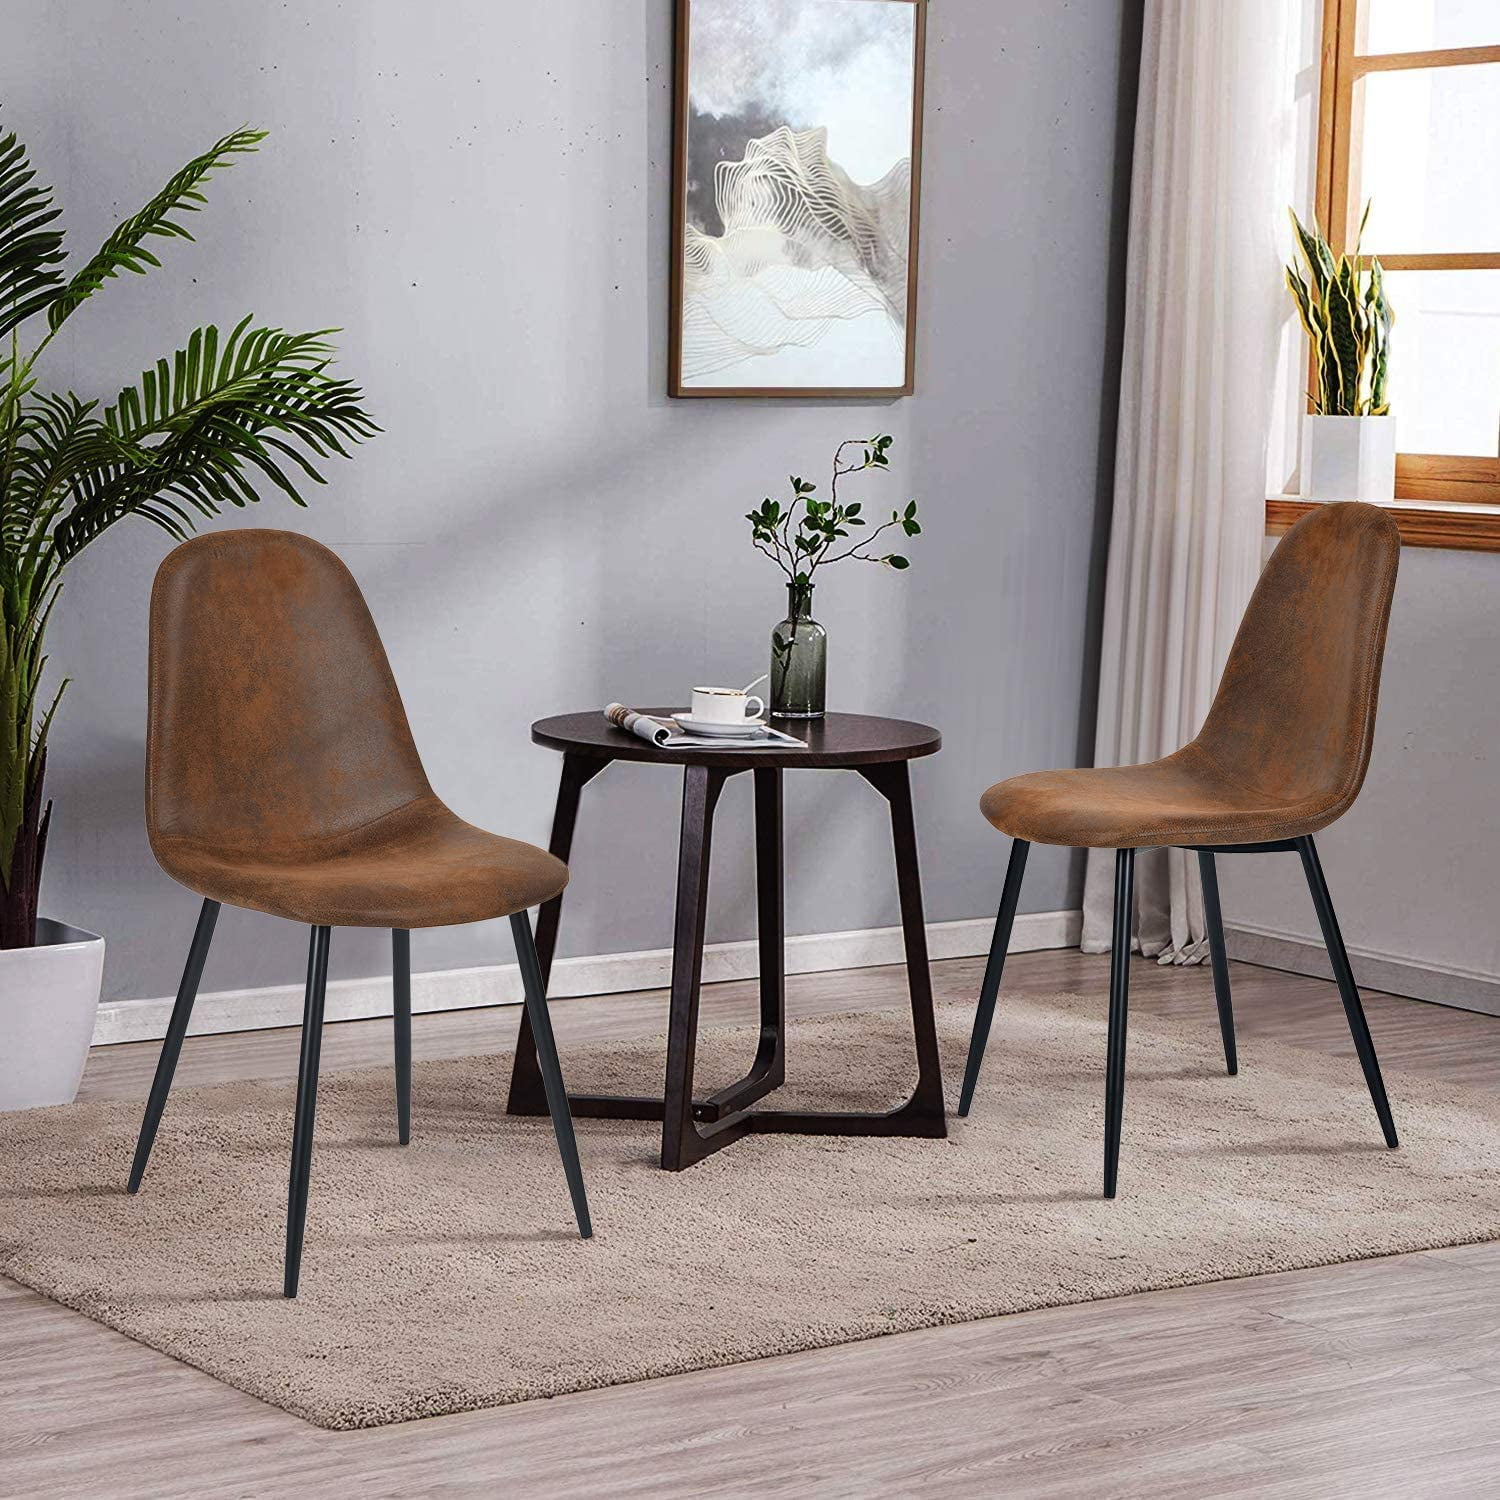 bestikke de sekstant YELROL Dining Chairs Set of 40 Modern Style Mid Century Chair for Kitchen  Dining Room Accent Chair in Dark Brown Black Leg - Walmart.com